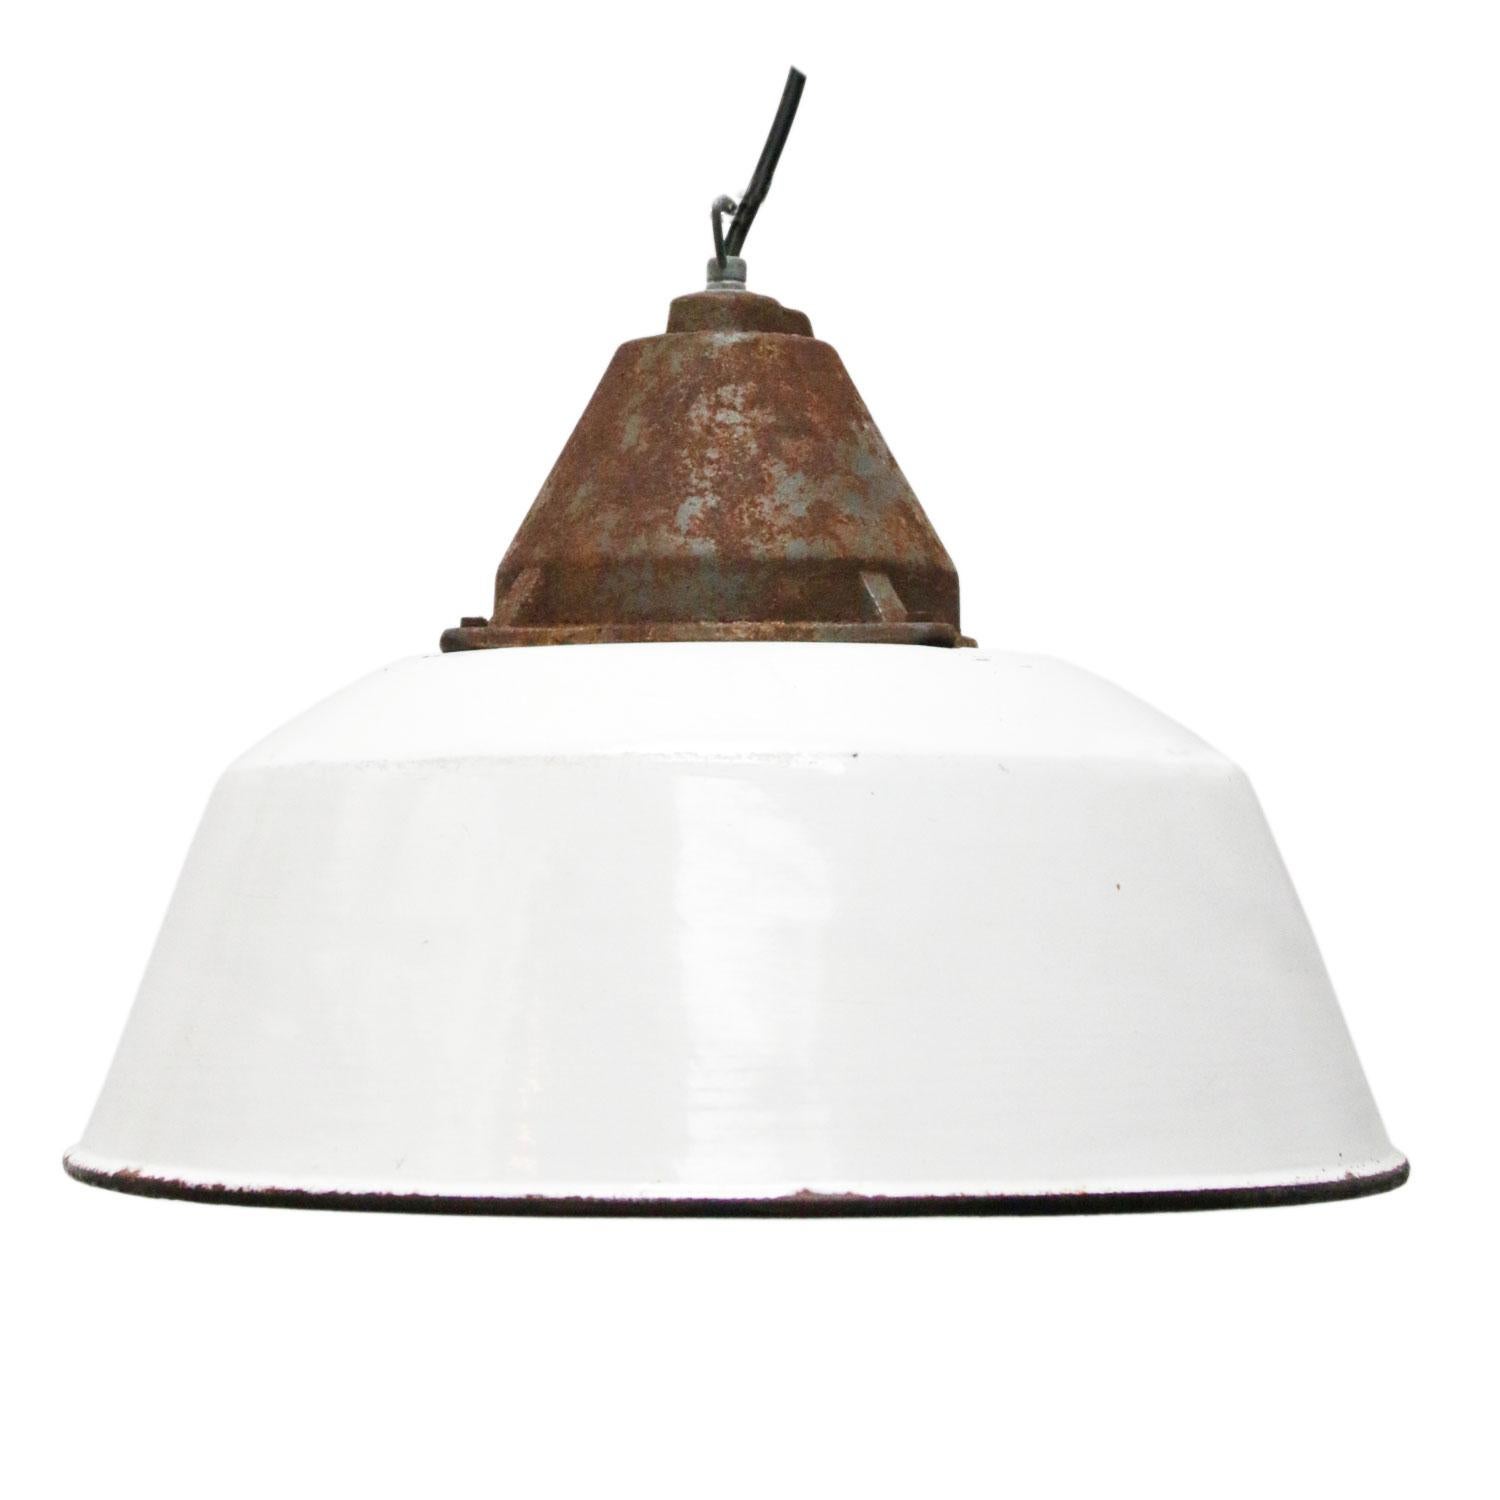 Factory hanging lamp
White enamel white interior
Cast iron top

Weight 5.0 kg / 11 lb

Priced per individual item. All lamps have been made suitable by international standards for incandescent light bulbs, energy-efficient and LED bulbs. E26/E27